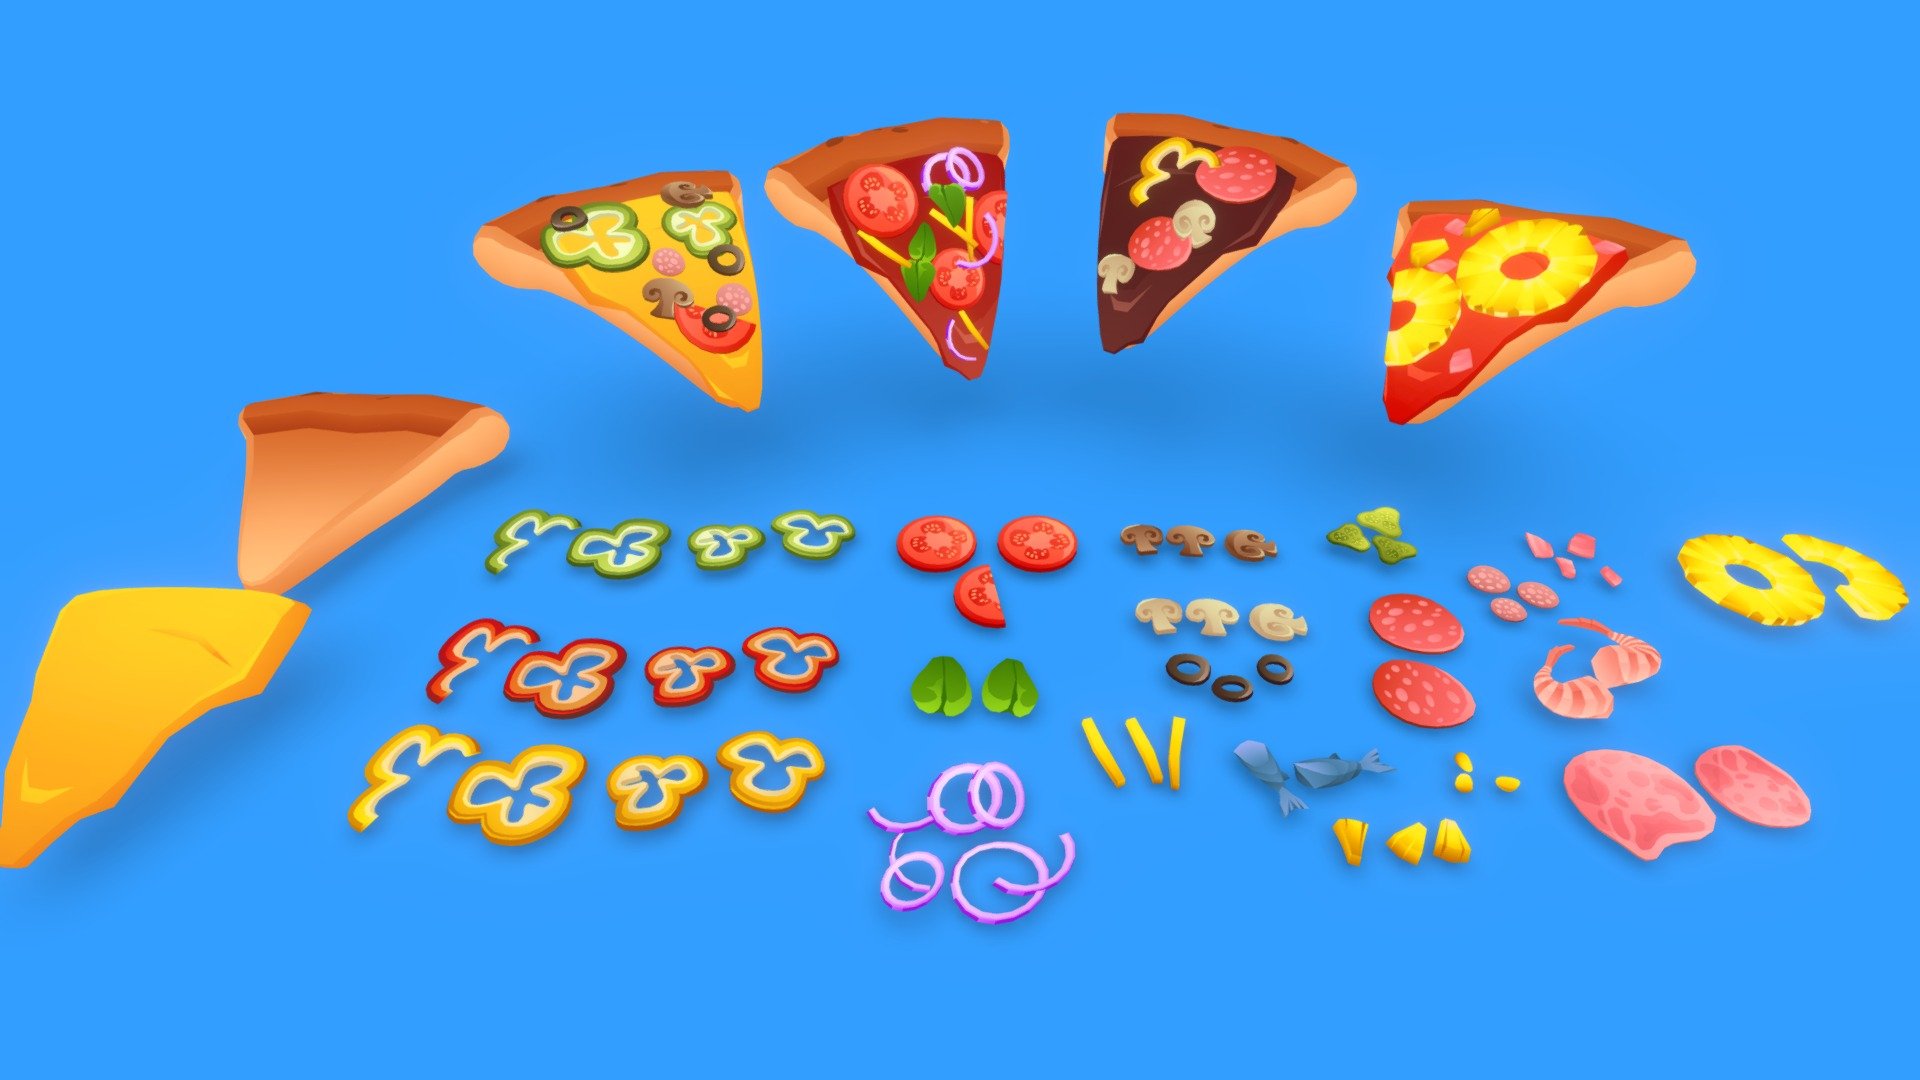 **Low poly cute unlit pizzas pack. **

Textured with gradient atlas, so it is performant for mobile games and video games.

Like a few of my other assets
in the same style, it uses a single texture diffuse map and is mapped using only color gradients. 
All gradient textures can be extended and combined to a large atlas.

There are more assets in this style to add to your game scene or environment. Check out my sale.

If you want to change the colors of the assets, you just need to move the UVs on the atlas to a different gradient.
Or contact me for changes, for a small fee.

**I also accept freelance jobs. Do not hesitate to write me. **

*-------------Terms of Use--------------

Commercial use of the assets  provided is permitted but cannot be included in an asset pack or sold at any sort of asset/resource marketplace.*

9213140

5207418 - Stylized Unlit Pizza Pack - Buy Royalty Free 3D model by Stylized Box (@Stylized_Box) 3d model